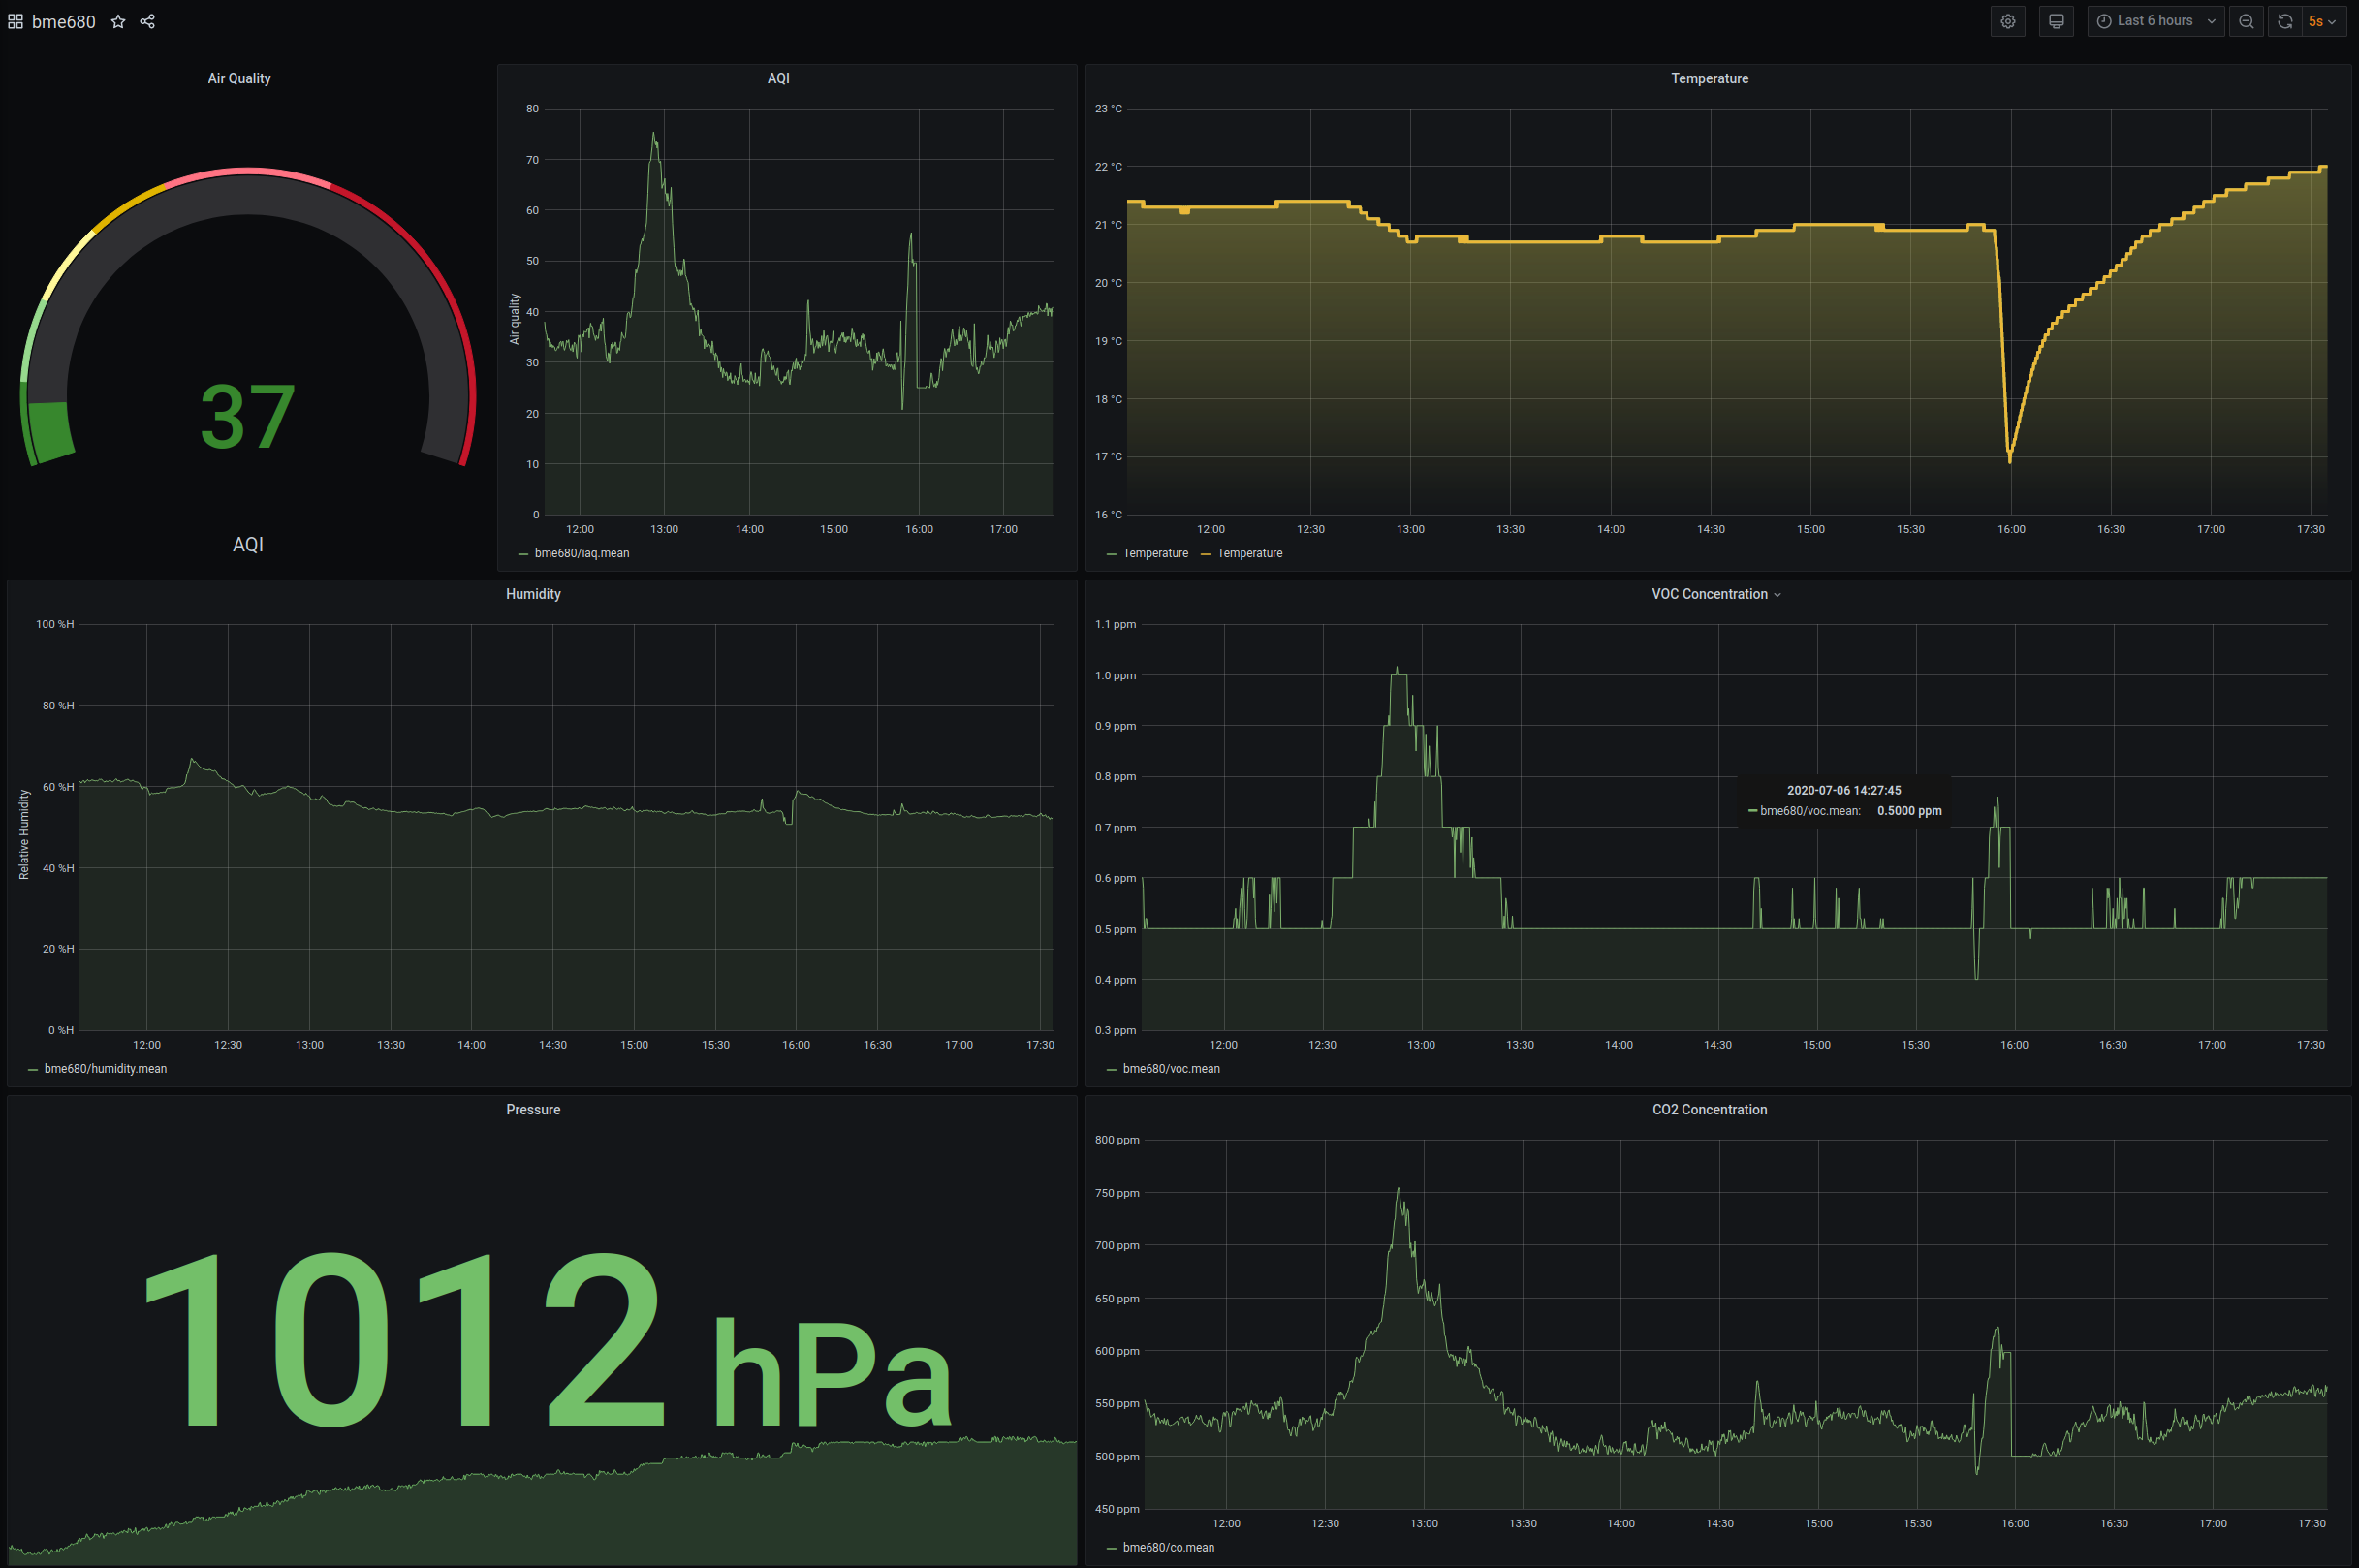 A screenshot of the graphs in Grafana, showing metrics suck has the air quality index, the temperature, humidity, VOC concentration, and so on.